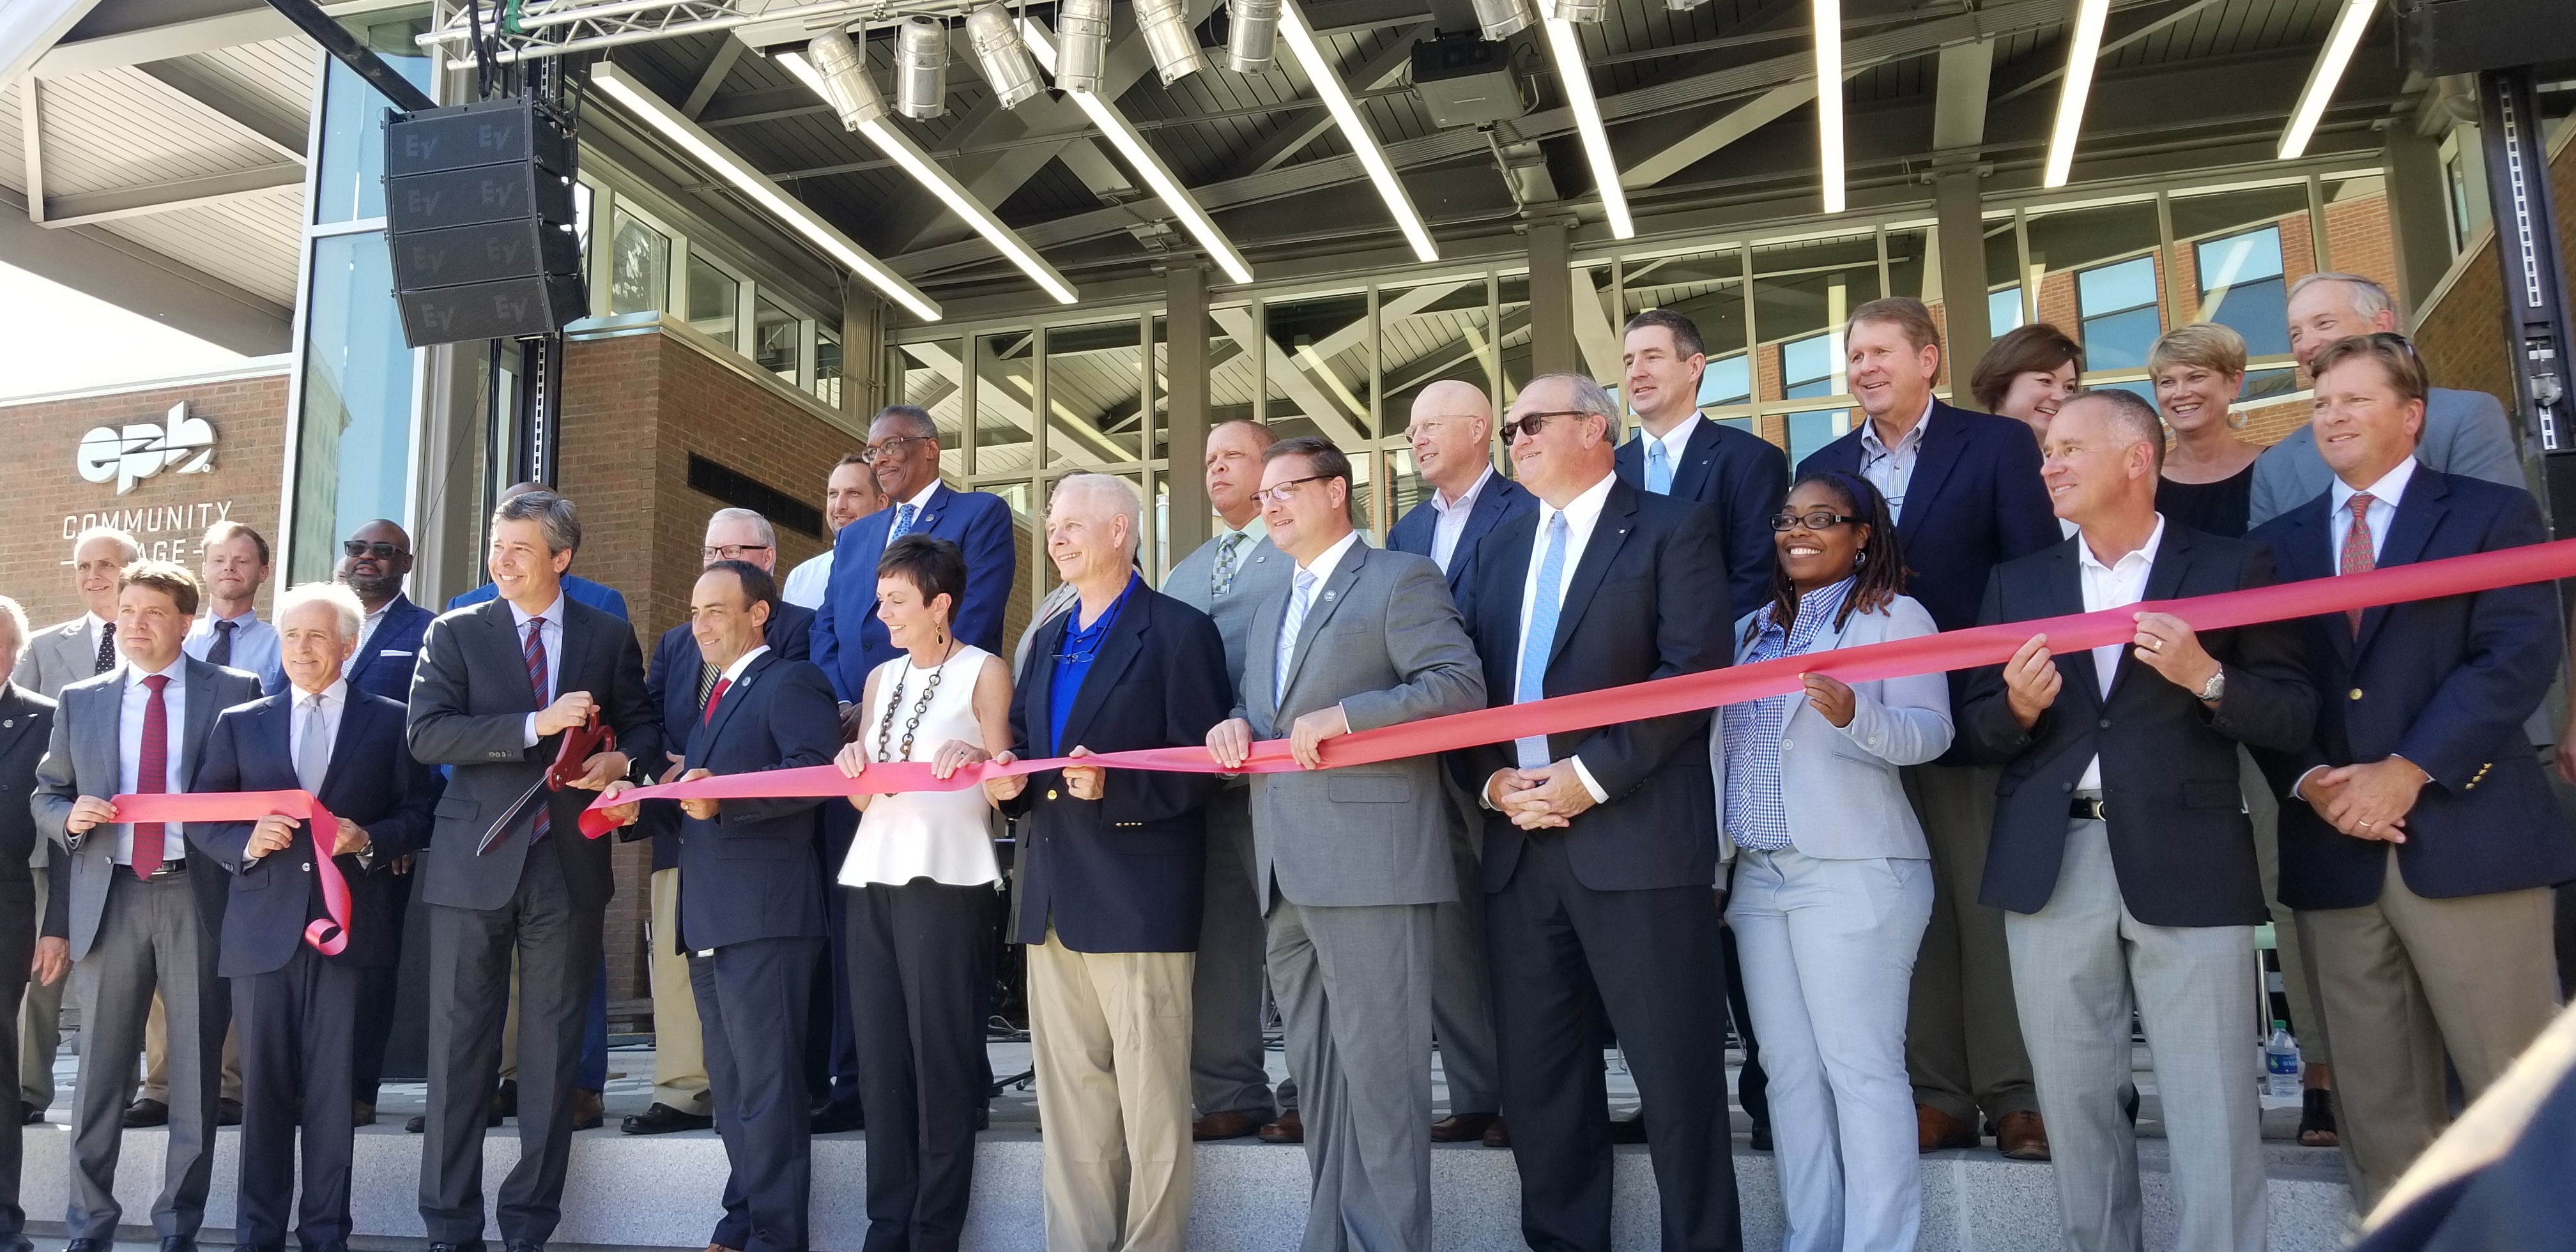 Miller Park Community Partners Participate in Ribbon Cutting for Miller Park Re-Opening Celebration